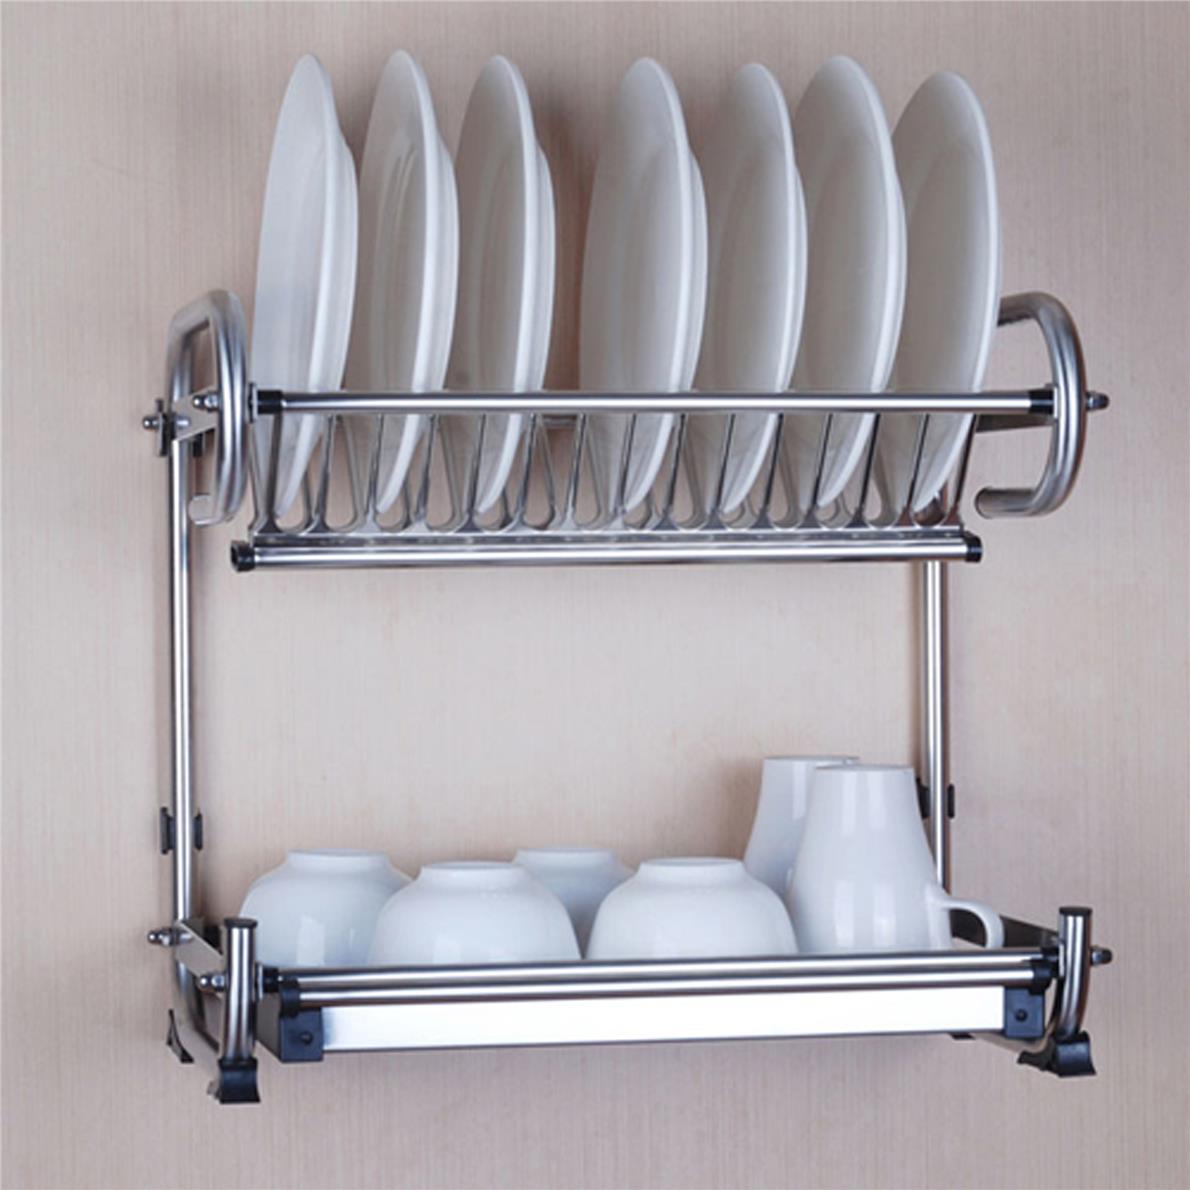 Kitchen Z Stainless Steel Dish Rack End 5 24 2017 515 PM